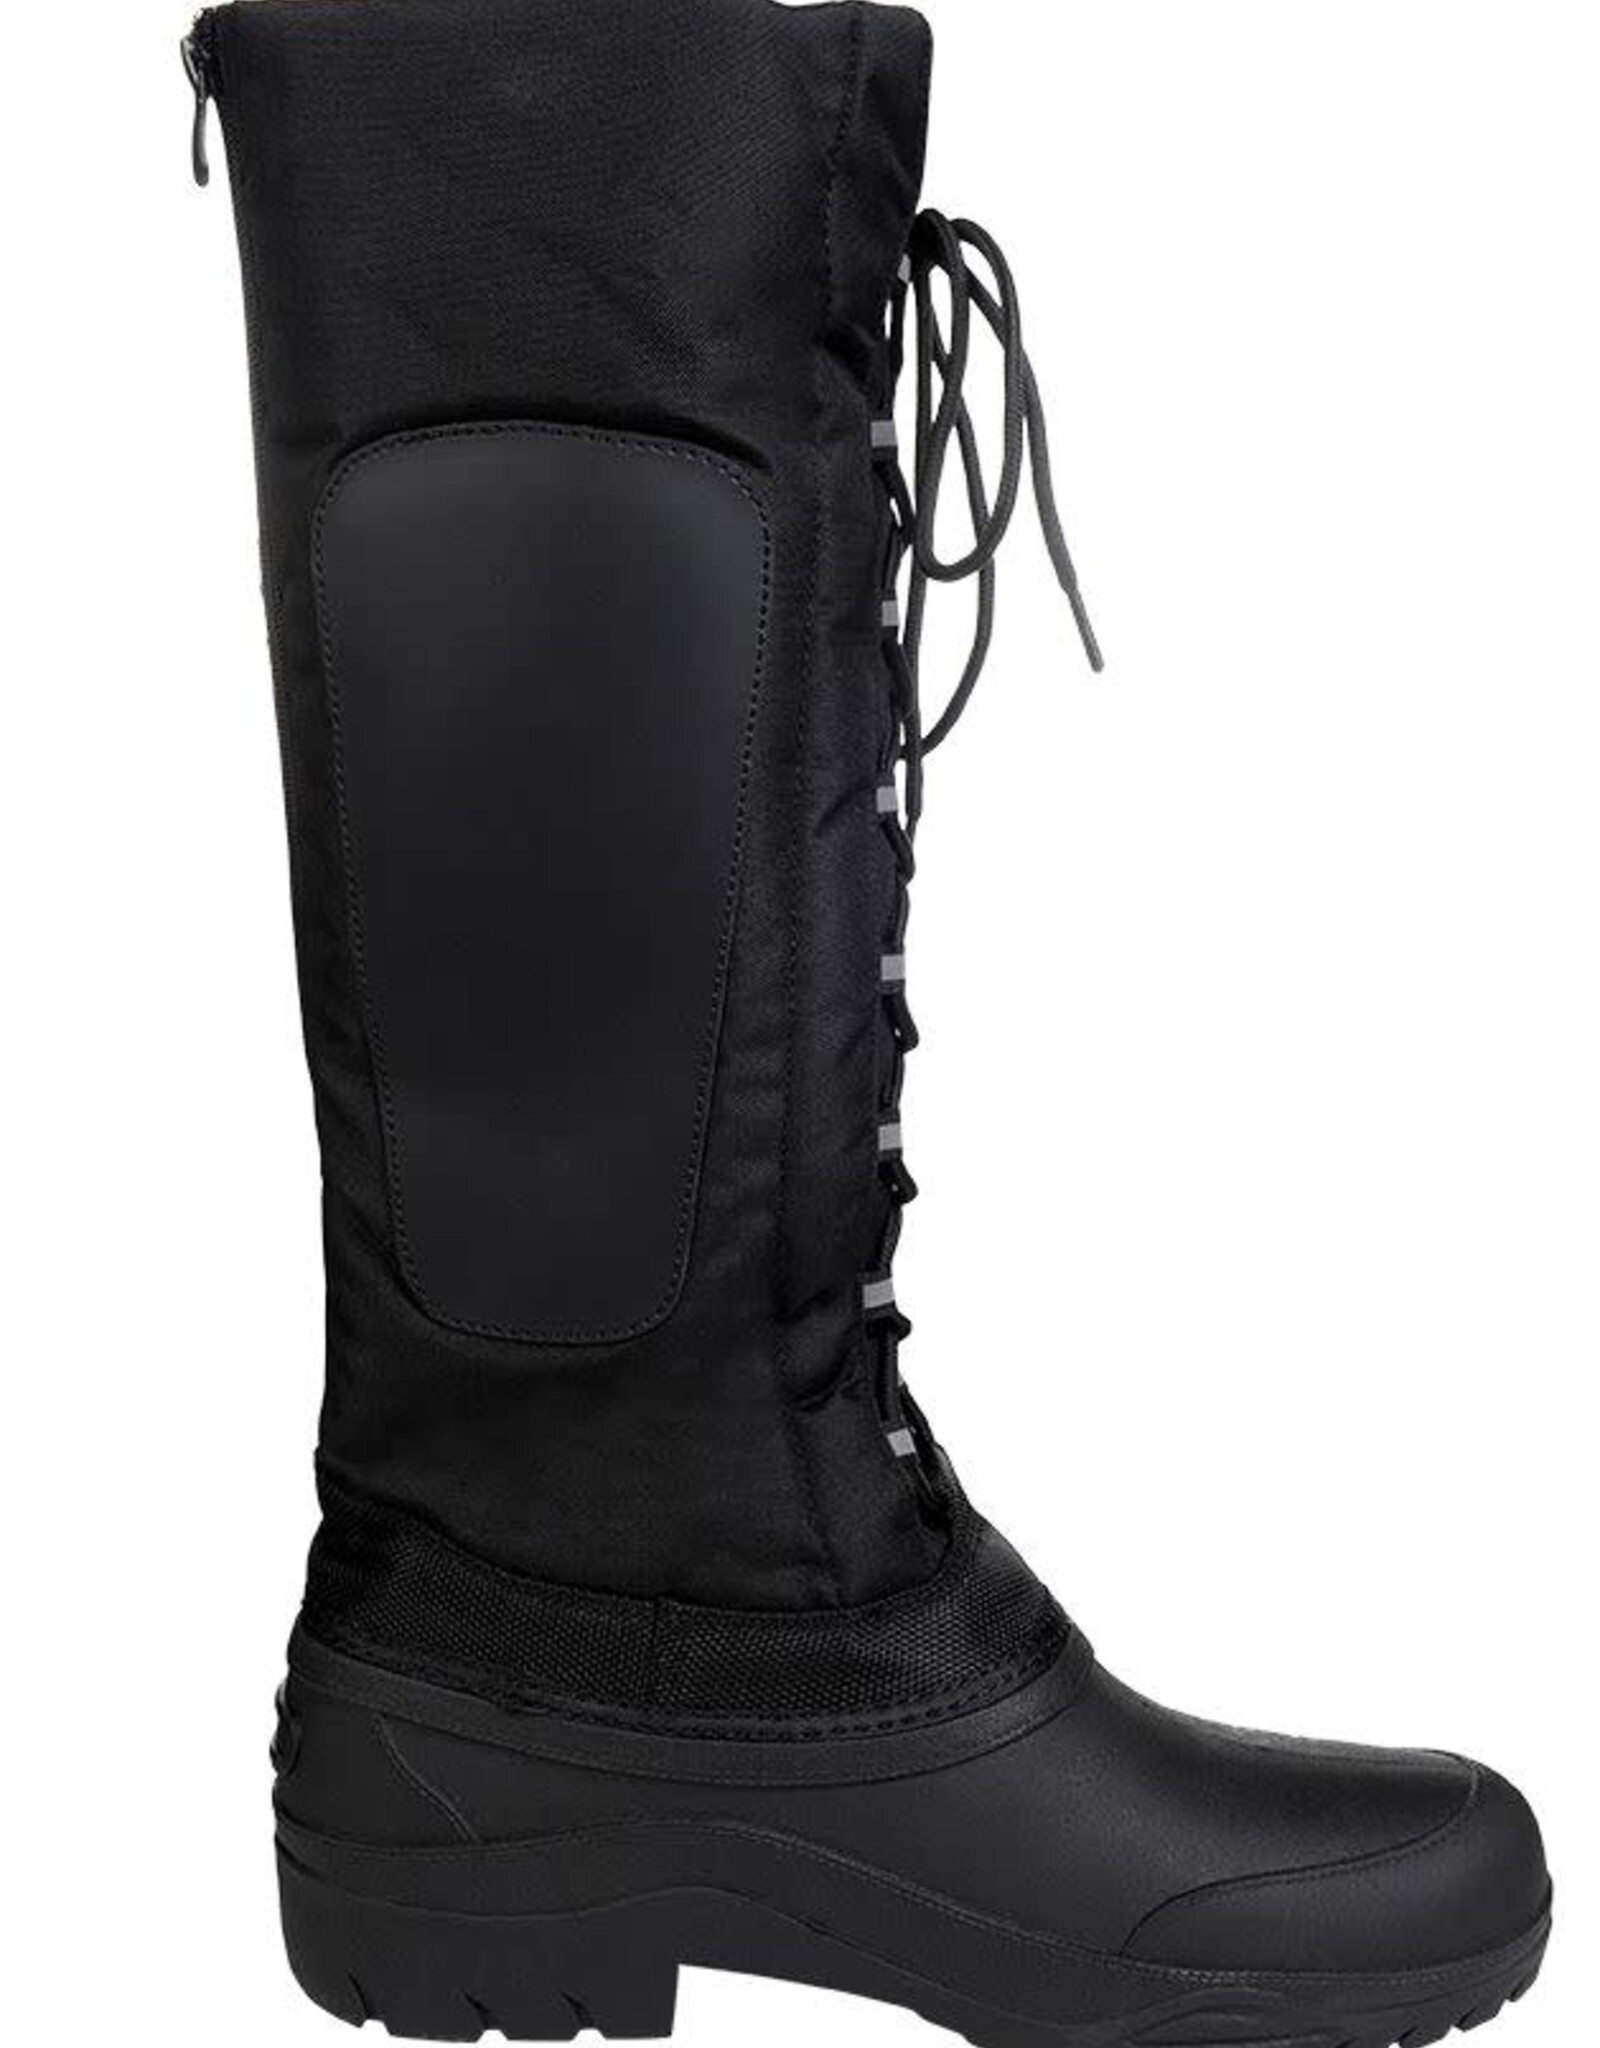 HKM Winter Boots Thermo Husky